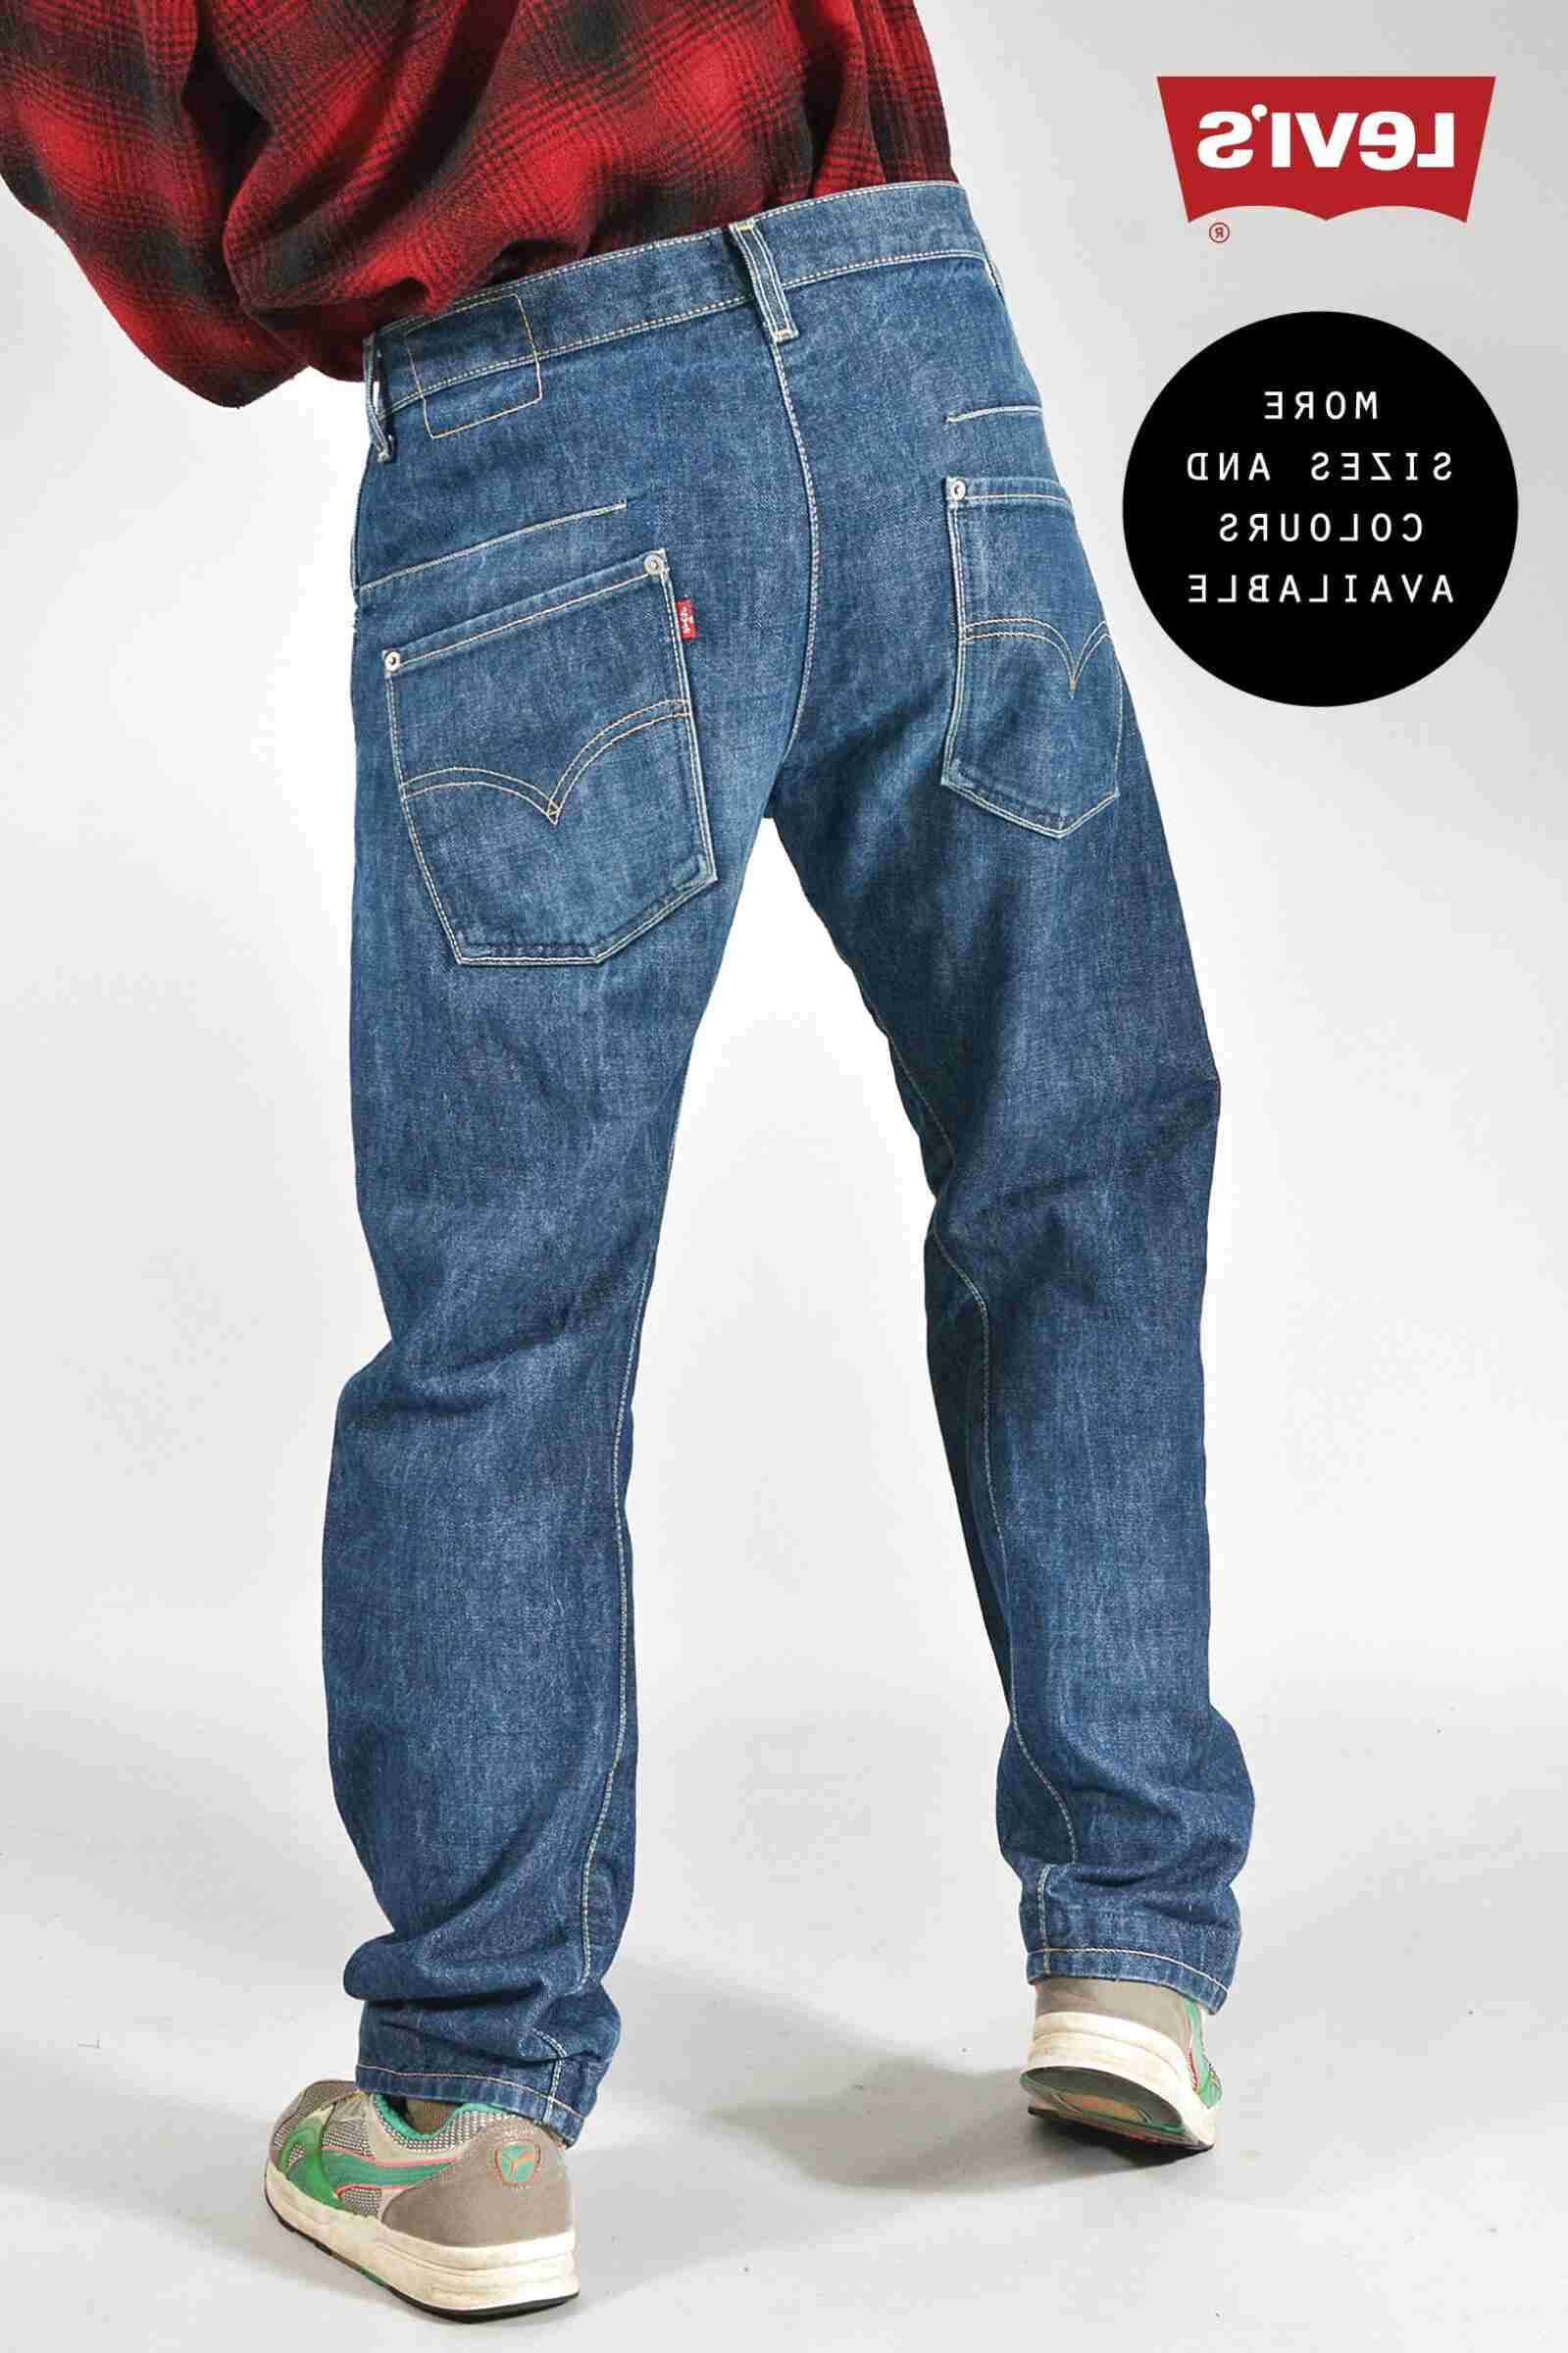 levis engineered twisted jeans,cheap - OFF 53% 